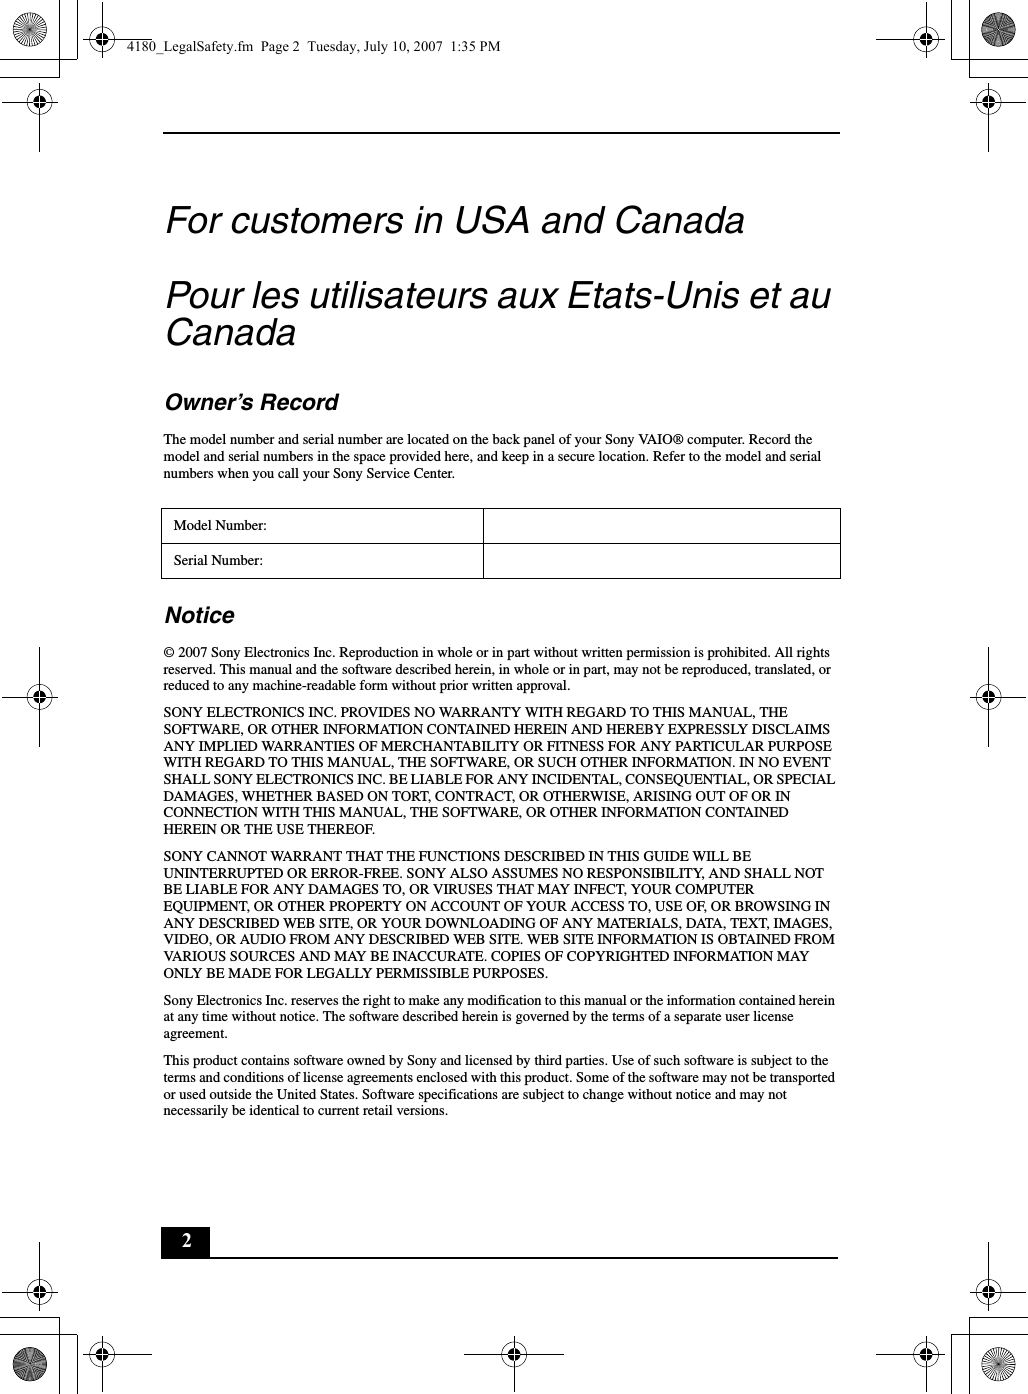 2For customers in USA and CanadaPour les utilisateurs aux Etats-Unis et au CanadaOwner’s RecordThe model number and serial number are located on the back panel of your Sony VAIO® computer. Record the model and serial numbers in the space provided here, and keep in a secure location. Refer to the model and serial numbers when you call your Sony Service Center.Notice© 2007 Sony Electronics Inc. Reproduction in whole or in part without written permission is prohibited. All rights reserved. This manual and the software described herein, in whole or in part, may not be reproduced, translated, or reduced to any machine-readable form without prior written approval.SONY ELECTRONICS INC. PROVIDES NO WARRANTY WITH REGARD TO THIS MANUAL, THE SOFTWARE, OR OTHER INFORMATION CONTAINED HEREIN AND HEREBY EXPRESSLY DISCLAIMS ANY IMPLIED WARRANTIES OF MERCHANTABILITY OR FITNESS FOR ANY PARTICULAR PURPOSE WITH REGARD TO THIS MANUAL, THE SOFTWARE, OR SUCH OTHER INFORMATION. IN NO EVENT SHALL SONY ELECTRONICS INC. BE LIABLE FOR ANY INCIDENTAL, CONSEQUENTIAL, OR SPECIAL DAMAGES, WHETHER BASED ON TORT, CONTRACT, OR OTHERWISE, ARISING OUT OF OR IN CONNECTION WITH THIS MANUAL, THE SOFTWARE, OR OTHER INFORMATION CONTAINED HEREIN OR THE USE THEREOF.SONY CANNOT WARRANT THAT THE FUNCTIONS DESCRIBED IN THIS GUIDE WILL BE UNINTERRUPTED OR ERROR-FREE. SONY ALSO ASSUMES NO RESPONSIBILITY, AND SHALL NOT BE LIABLE FOR ANY DAMAGES TO, OR VIRUSES THAT MAY INFECT, YOUR COMPUTER EQUIPMENT, OR OTHER PROPERTY ON ACCOUNT OF YOUR ACCESS TO, USE OF, OR BROWSING IN ANY DESCRIBED WEB SITE, OR YOUR DOWNLOADING OF ANY MATERIALS, DATA, TEXT, IMAGES, VIDEO, OR AUDIO FROM ANY DESCRIBED WEB SITE. WEB SITE INFORMATION IS OBTAINED FROM VARIOUS SOURCES AND MAY BE INACCURATE. COPIES OF COPYRIGHTED INFORMATION MAY ONLY BE MADE FOR LEGALLY PERMISSIBLE PURPOSES.Sony Electronics Inc. reserves the right to make any modification to this manual or the information contained herein at any time without notice. The software described herein is governed by the terms of a separate user license agreement.This product contains software owned by Sony and licensed by third parties. Use of such software is subject to the terms and conditions of license agreements enclosed with this product. Some of the software may not be transported or used outside the United States. Software specifications are subject to change without notice and may not necessarily be identical to current retail versions.Model Number:Serial Number:4180_LegalSafety.fm  Page 2  Tuesday, July 10, 2007  1:35 PM